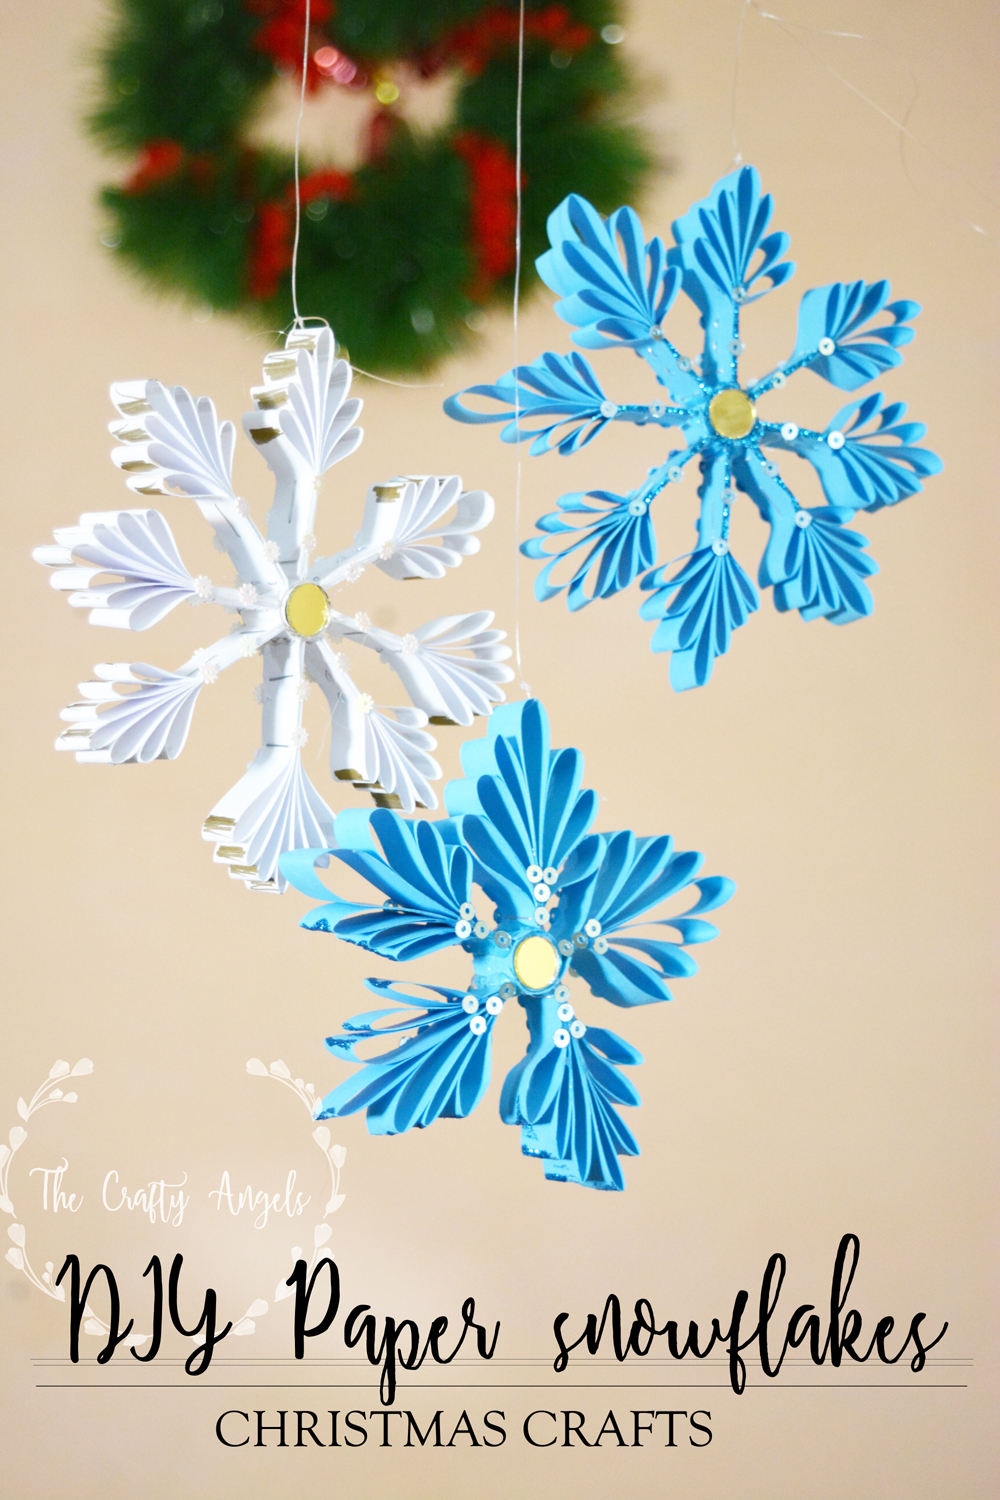 How To Make DIY Paper Snowflakes in 2018 - Paper Snow Flake Instructions